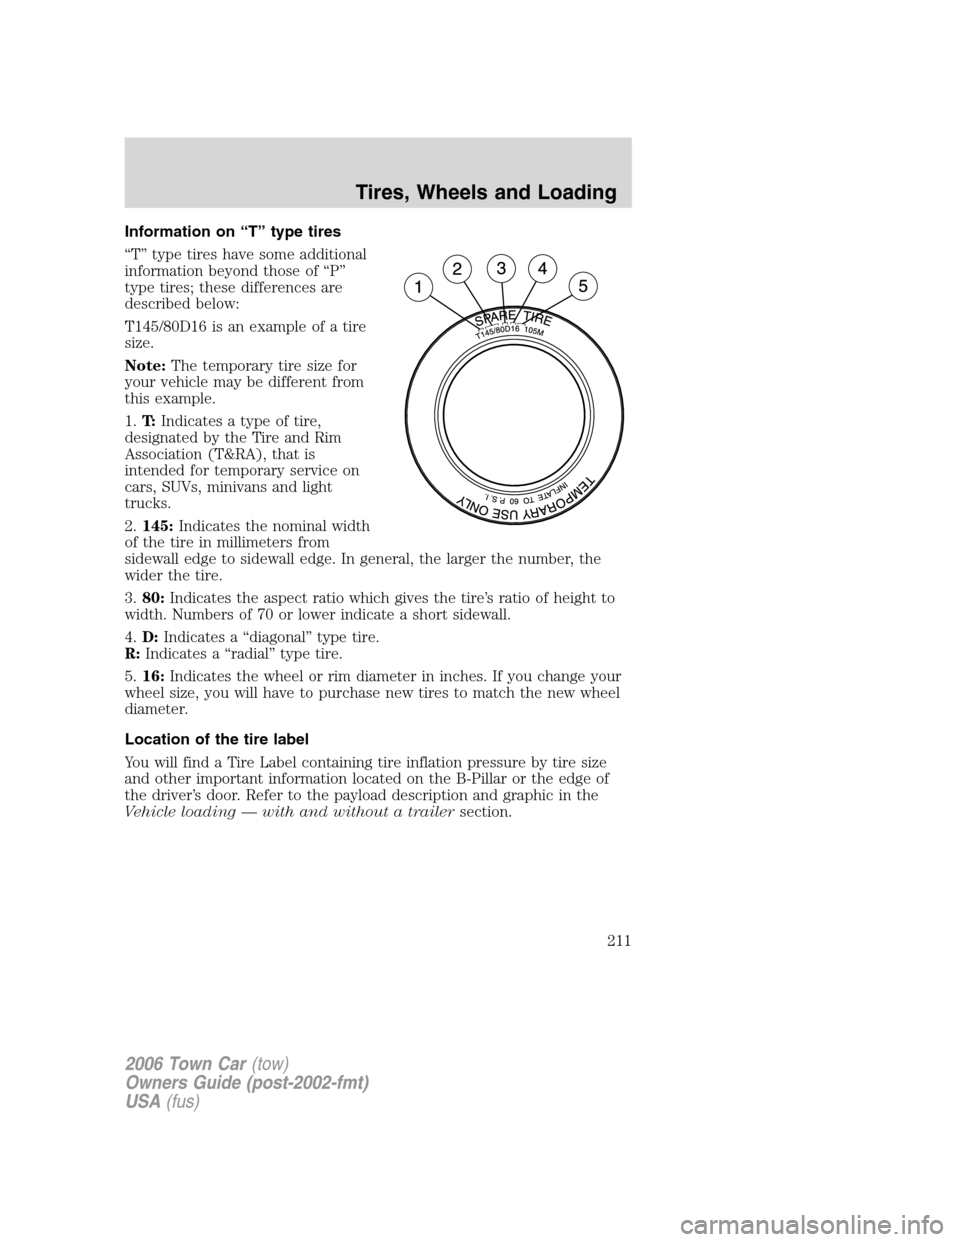 LINCOLN TOWN CAR 2006  Owners Manual Information on “T” type tires
“T” type tires have some additional
information beyond those of “P”
type tires; these differences are
described below:
T145/80D16 is an example of a tire
size